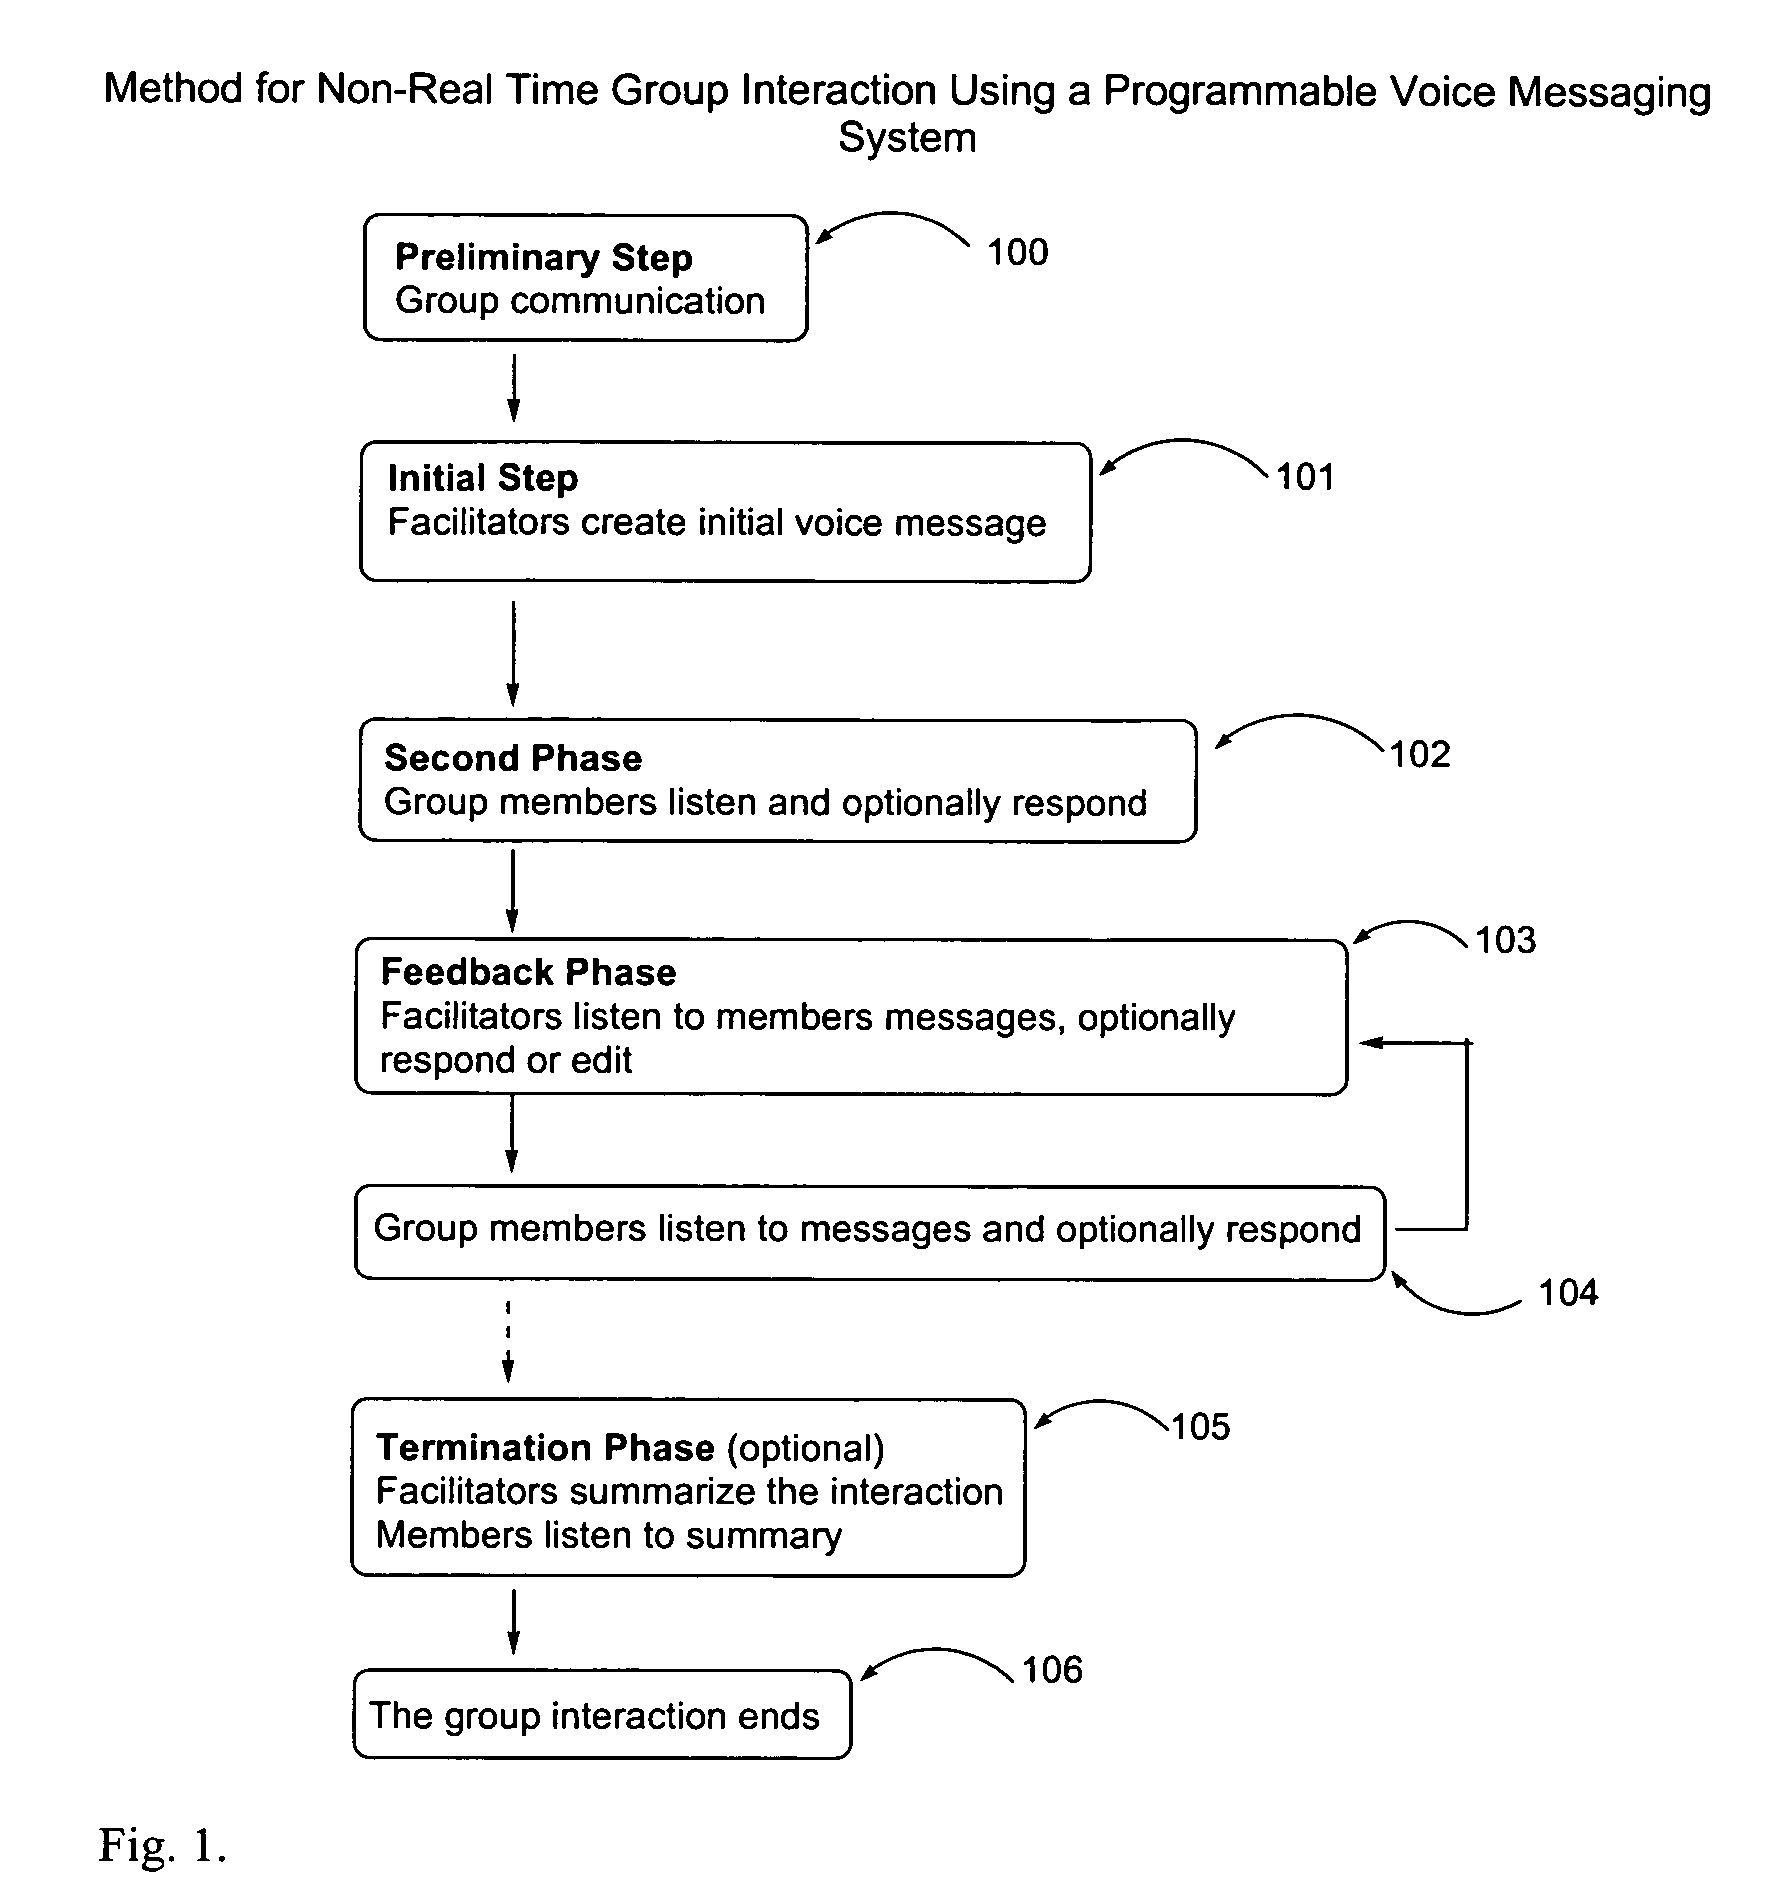 Method for non-real time group interaction using a voice messaging system